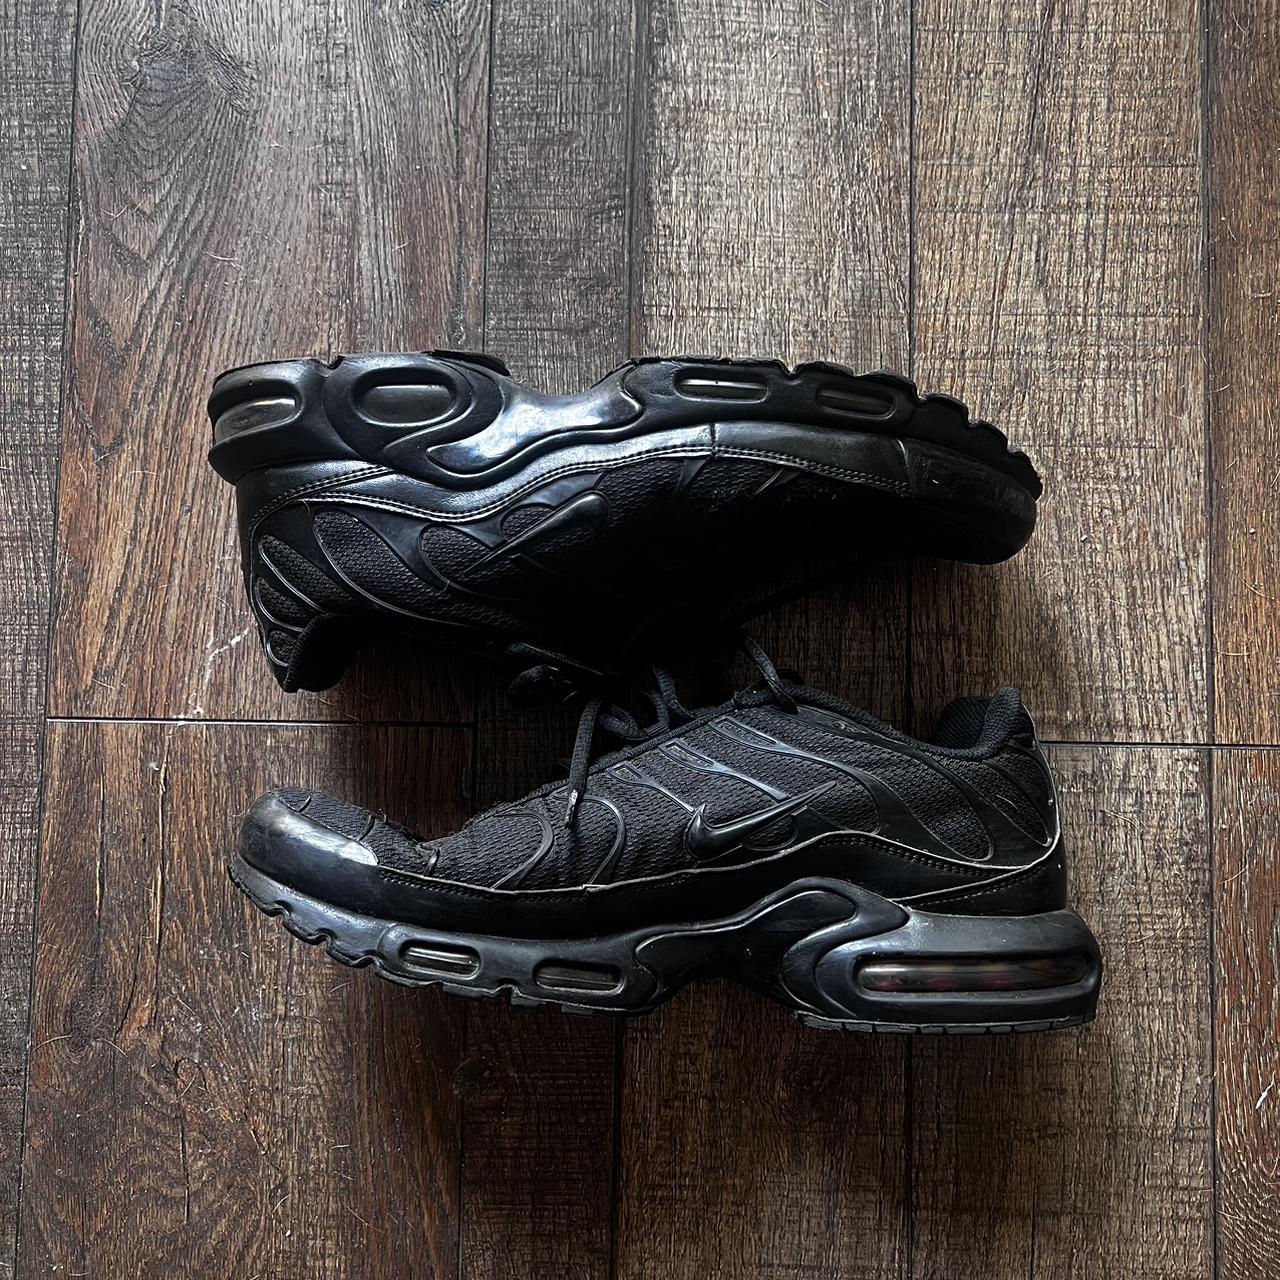 nike air max plus defects shown on pics 6/10... - Depop